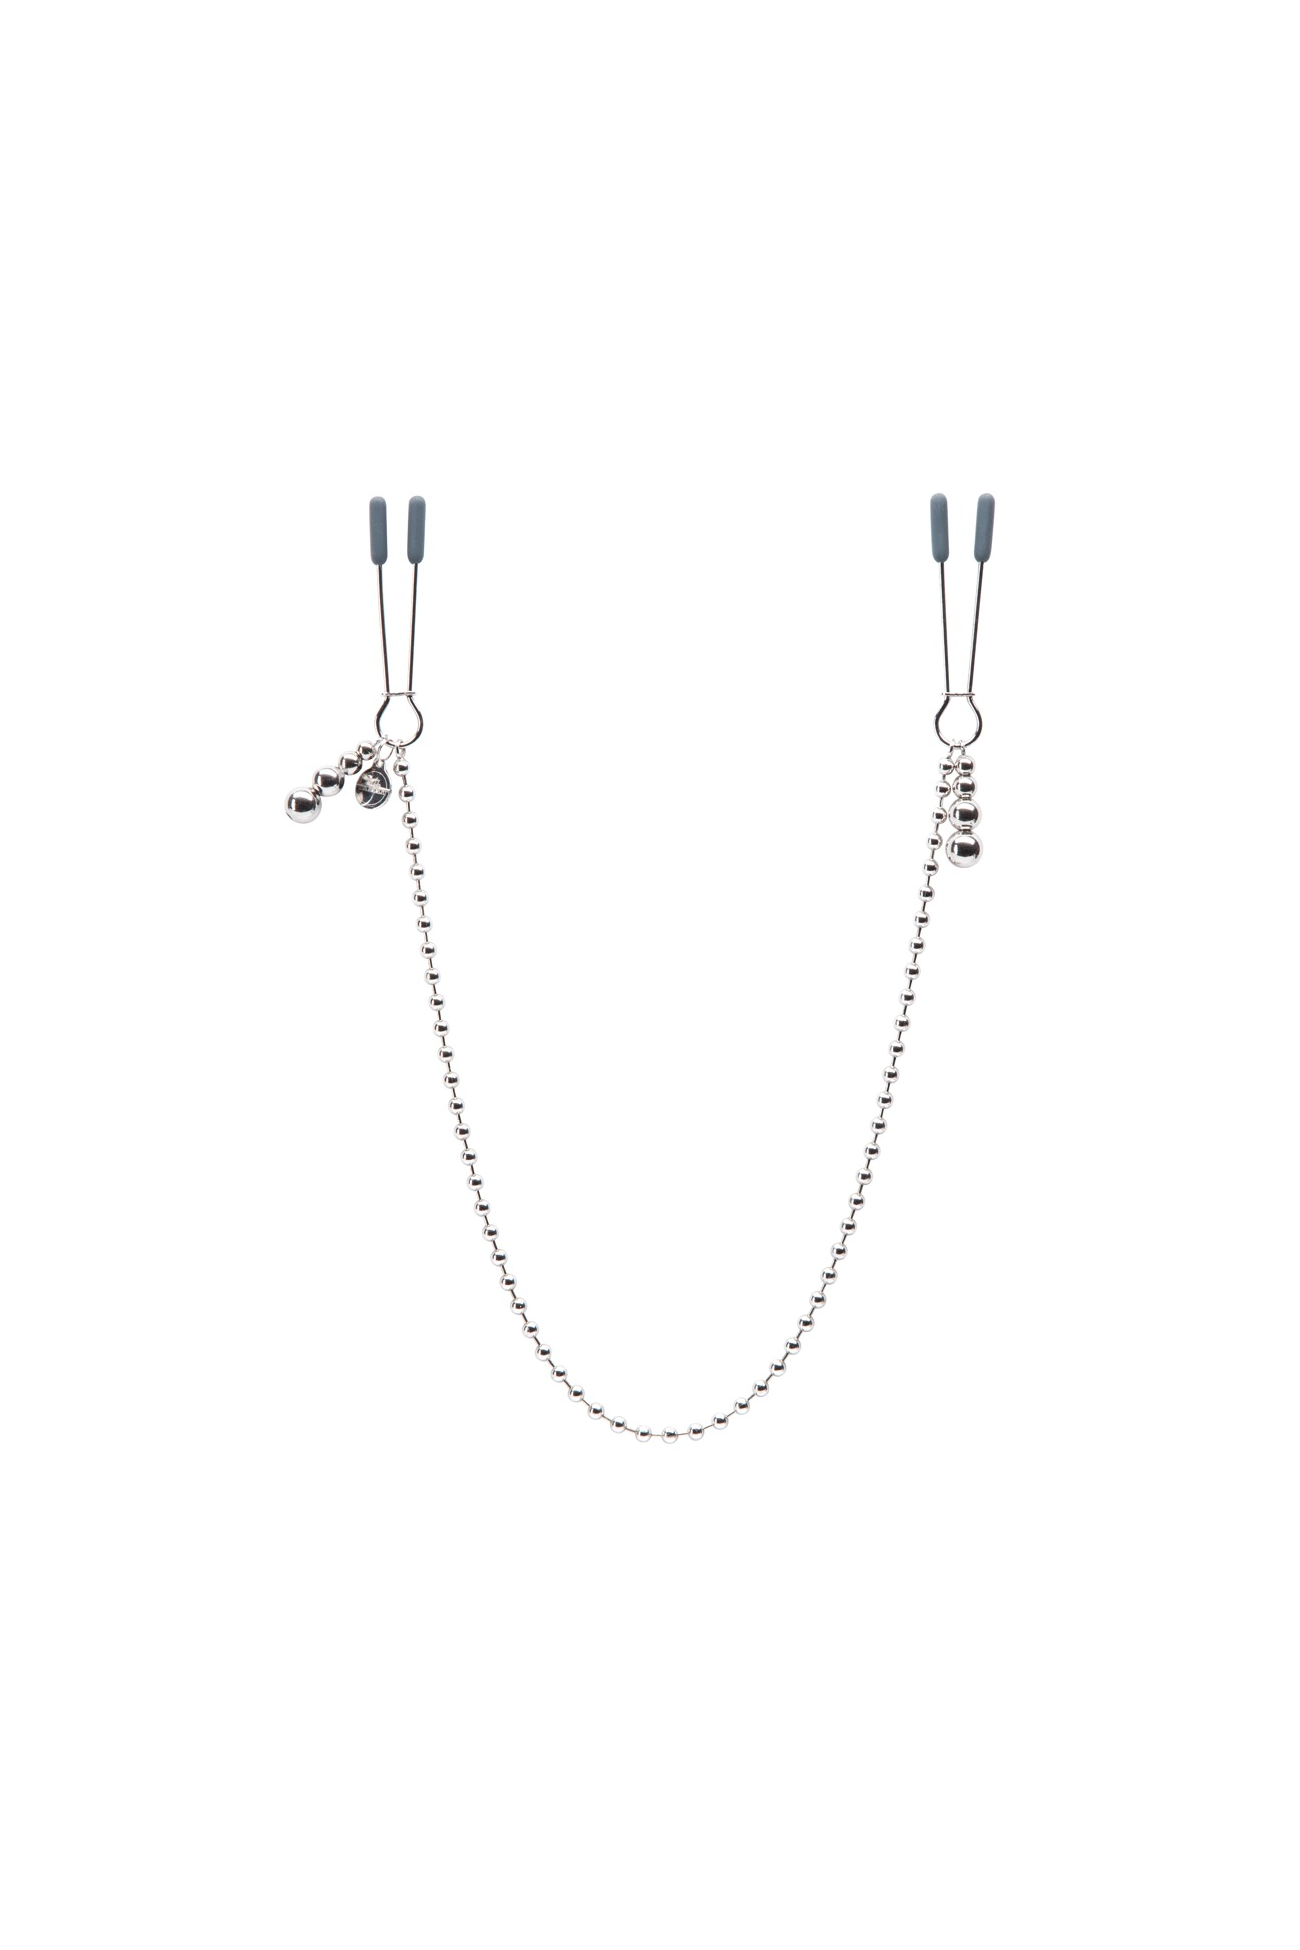 Fifty Shades of Grey - At My Mercy - Tepelklemmen met ketting